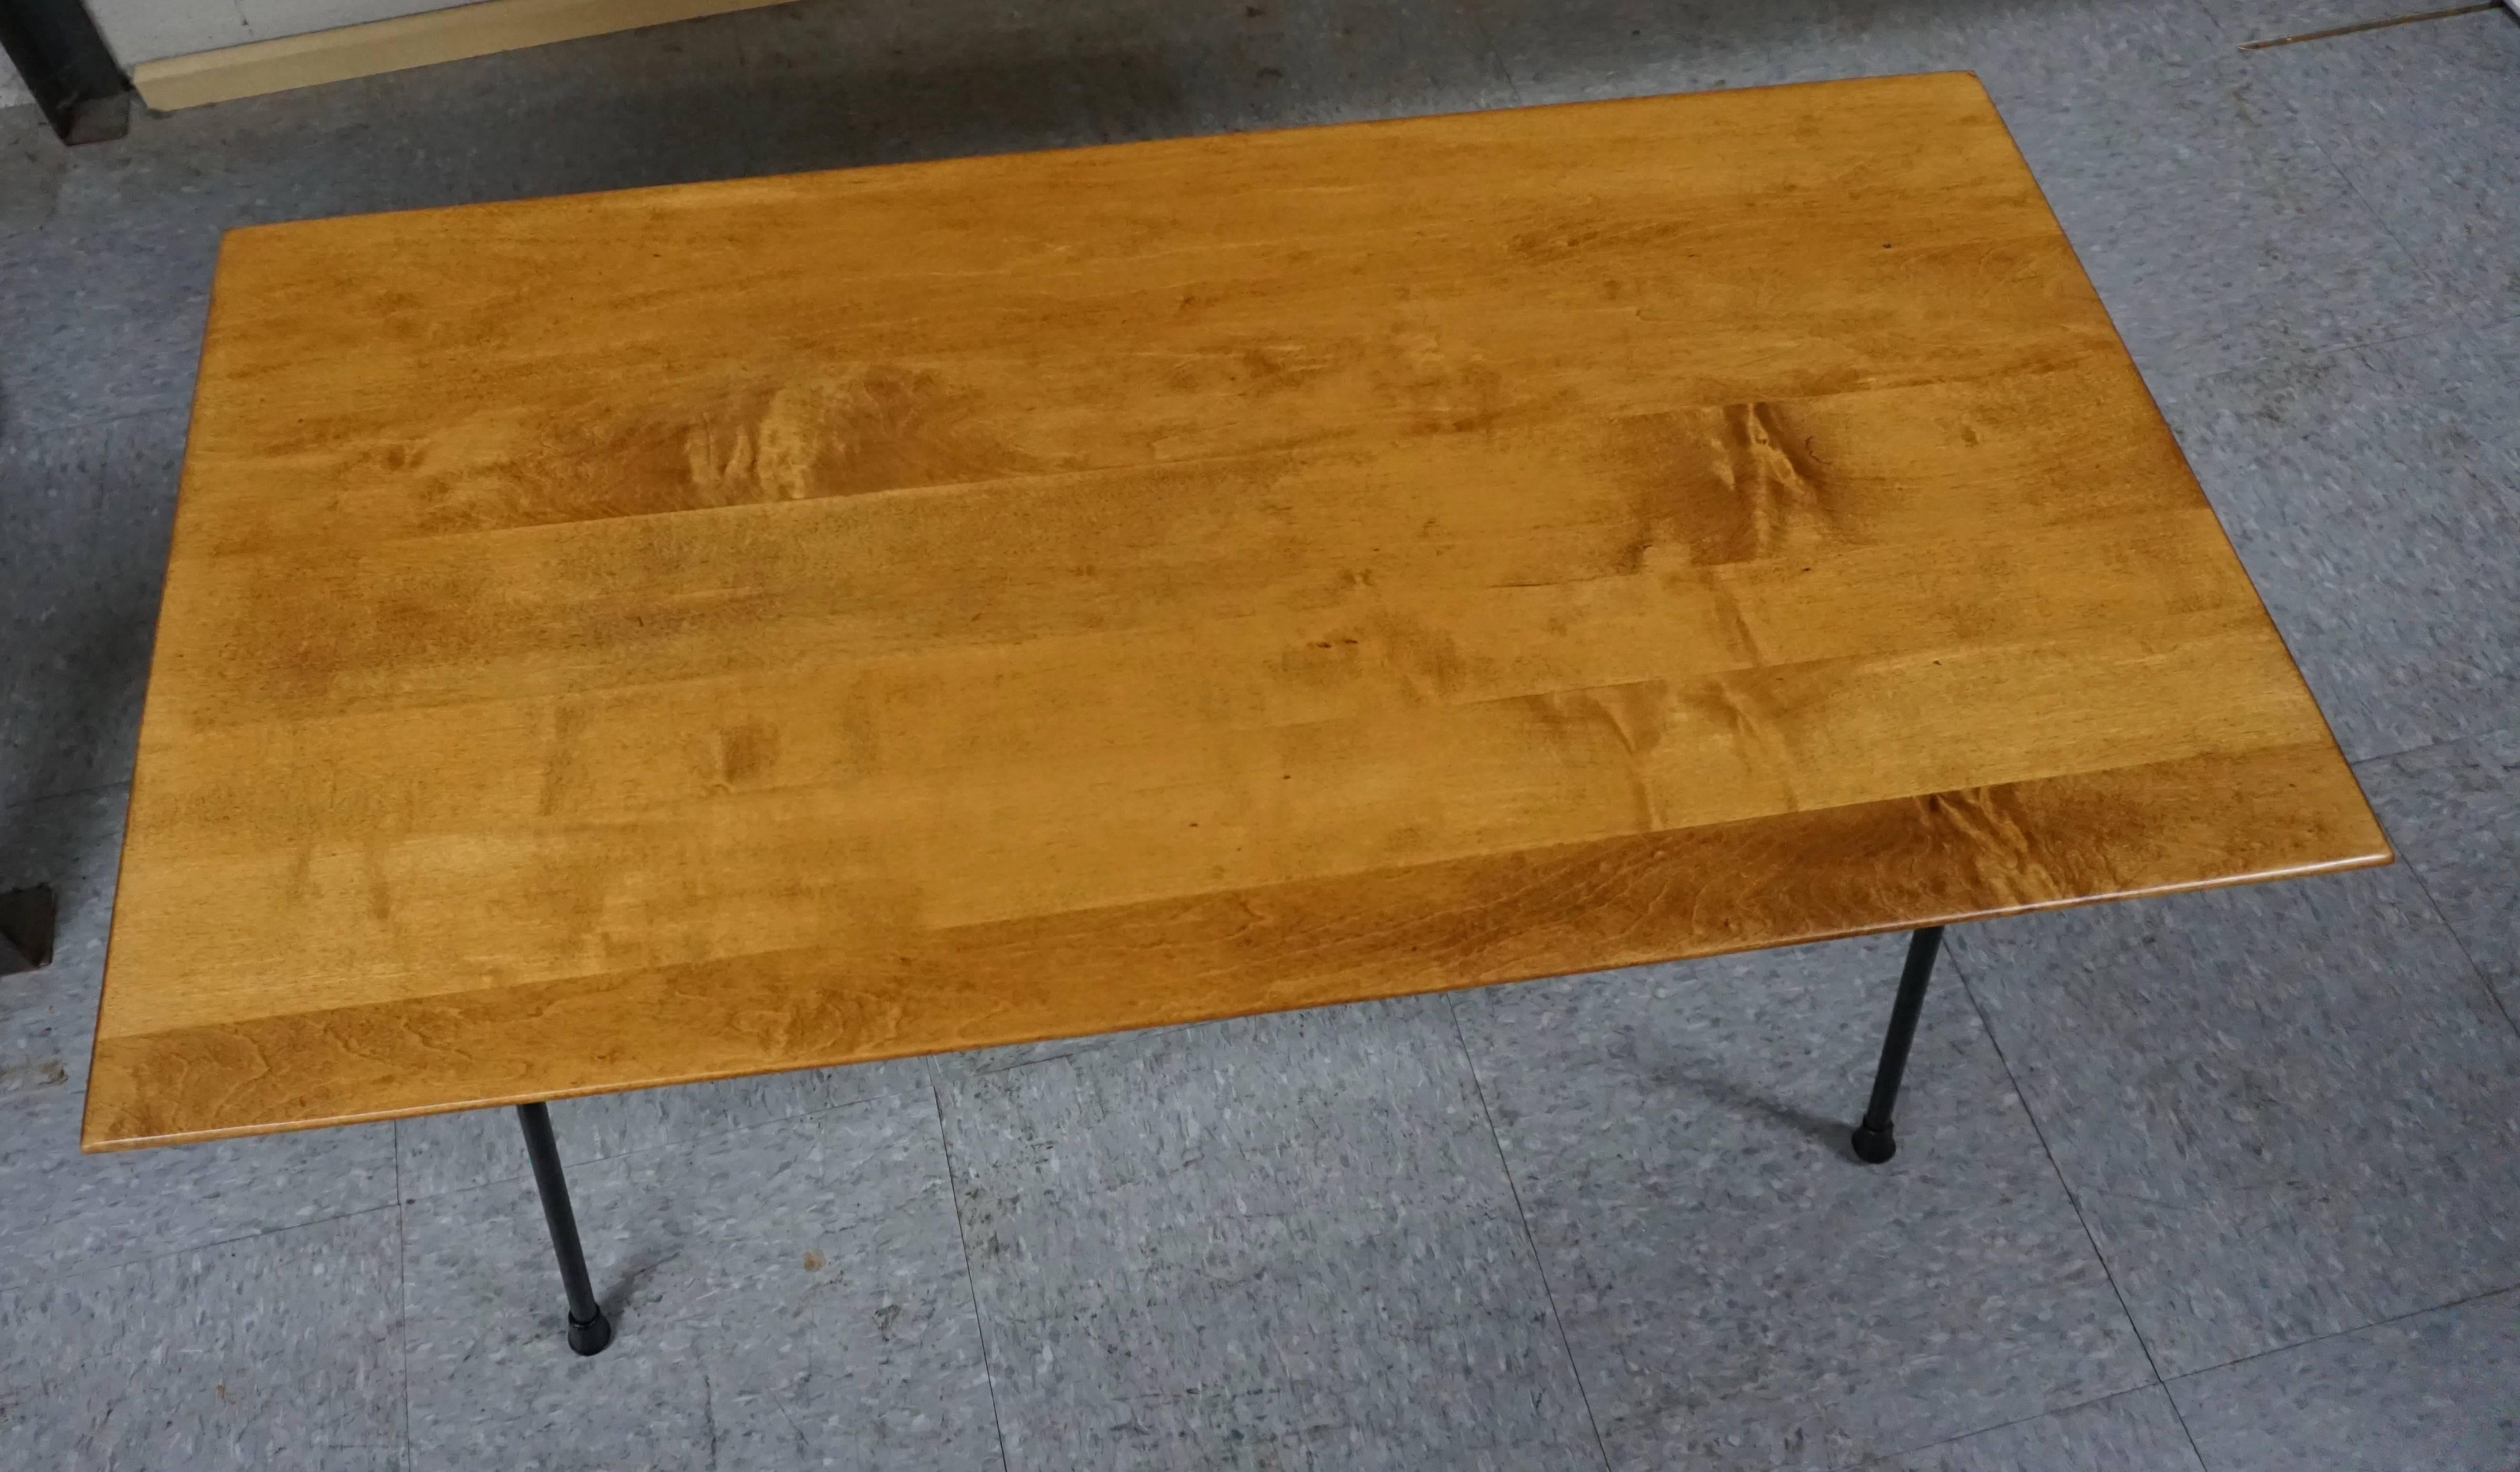 Wood top coffee table with fresh black paint on the base. Top has a warm toned finish, with just a few small naturally occurring impressions in the wood. Rubber feet are all intact.